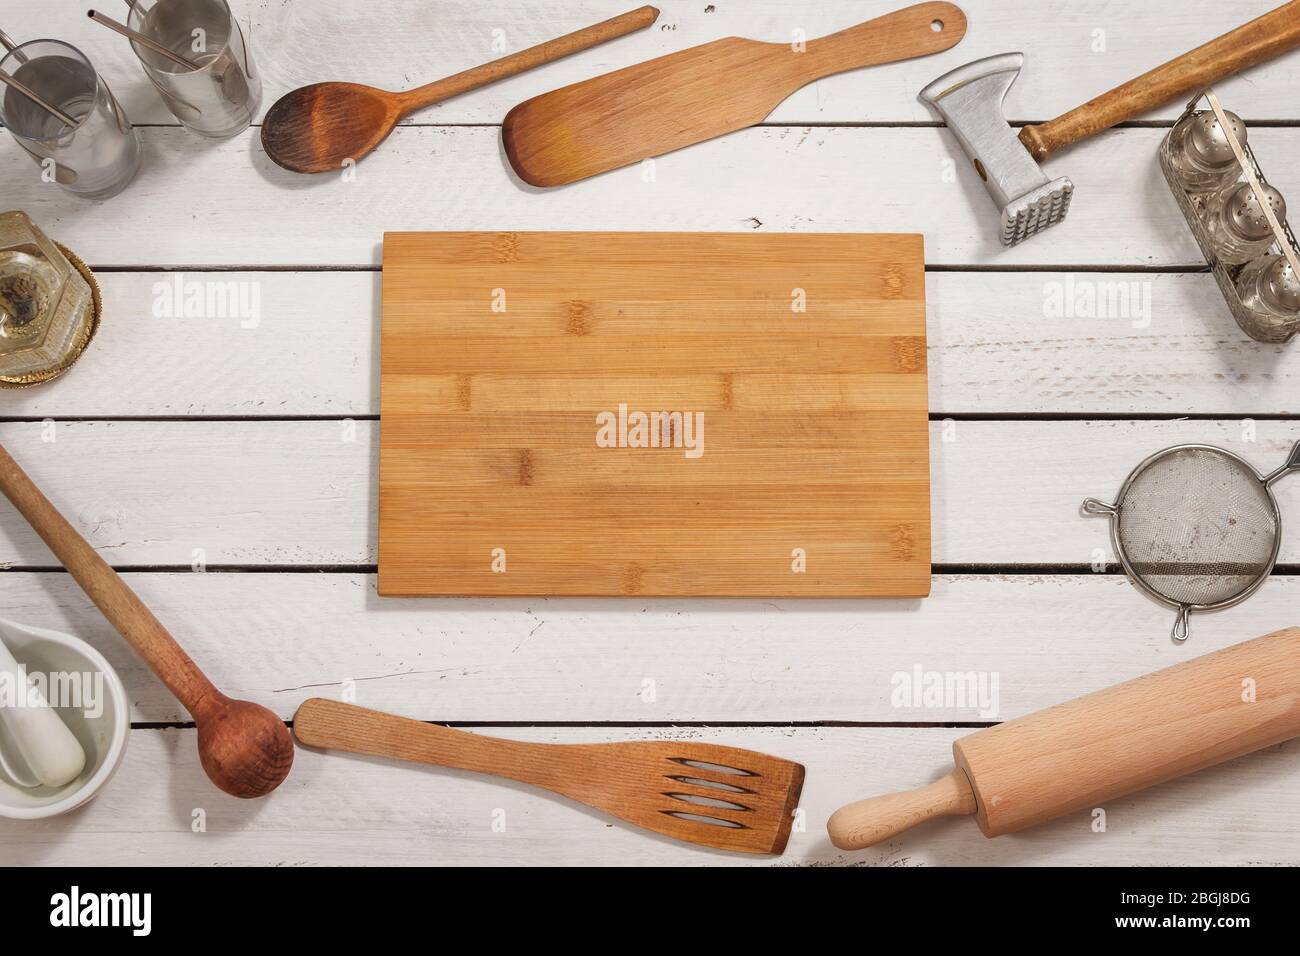 The wooden kitchen board lies on a white table. Around there are old stylish wooden kitchen utensils forming a background. Stock Photo